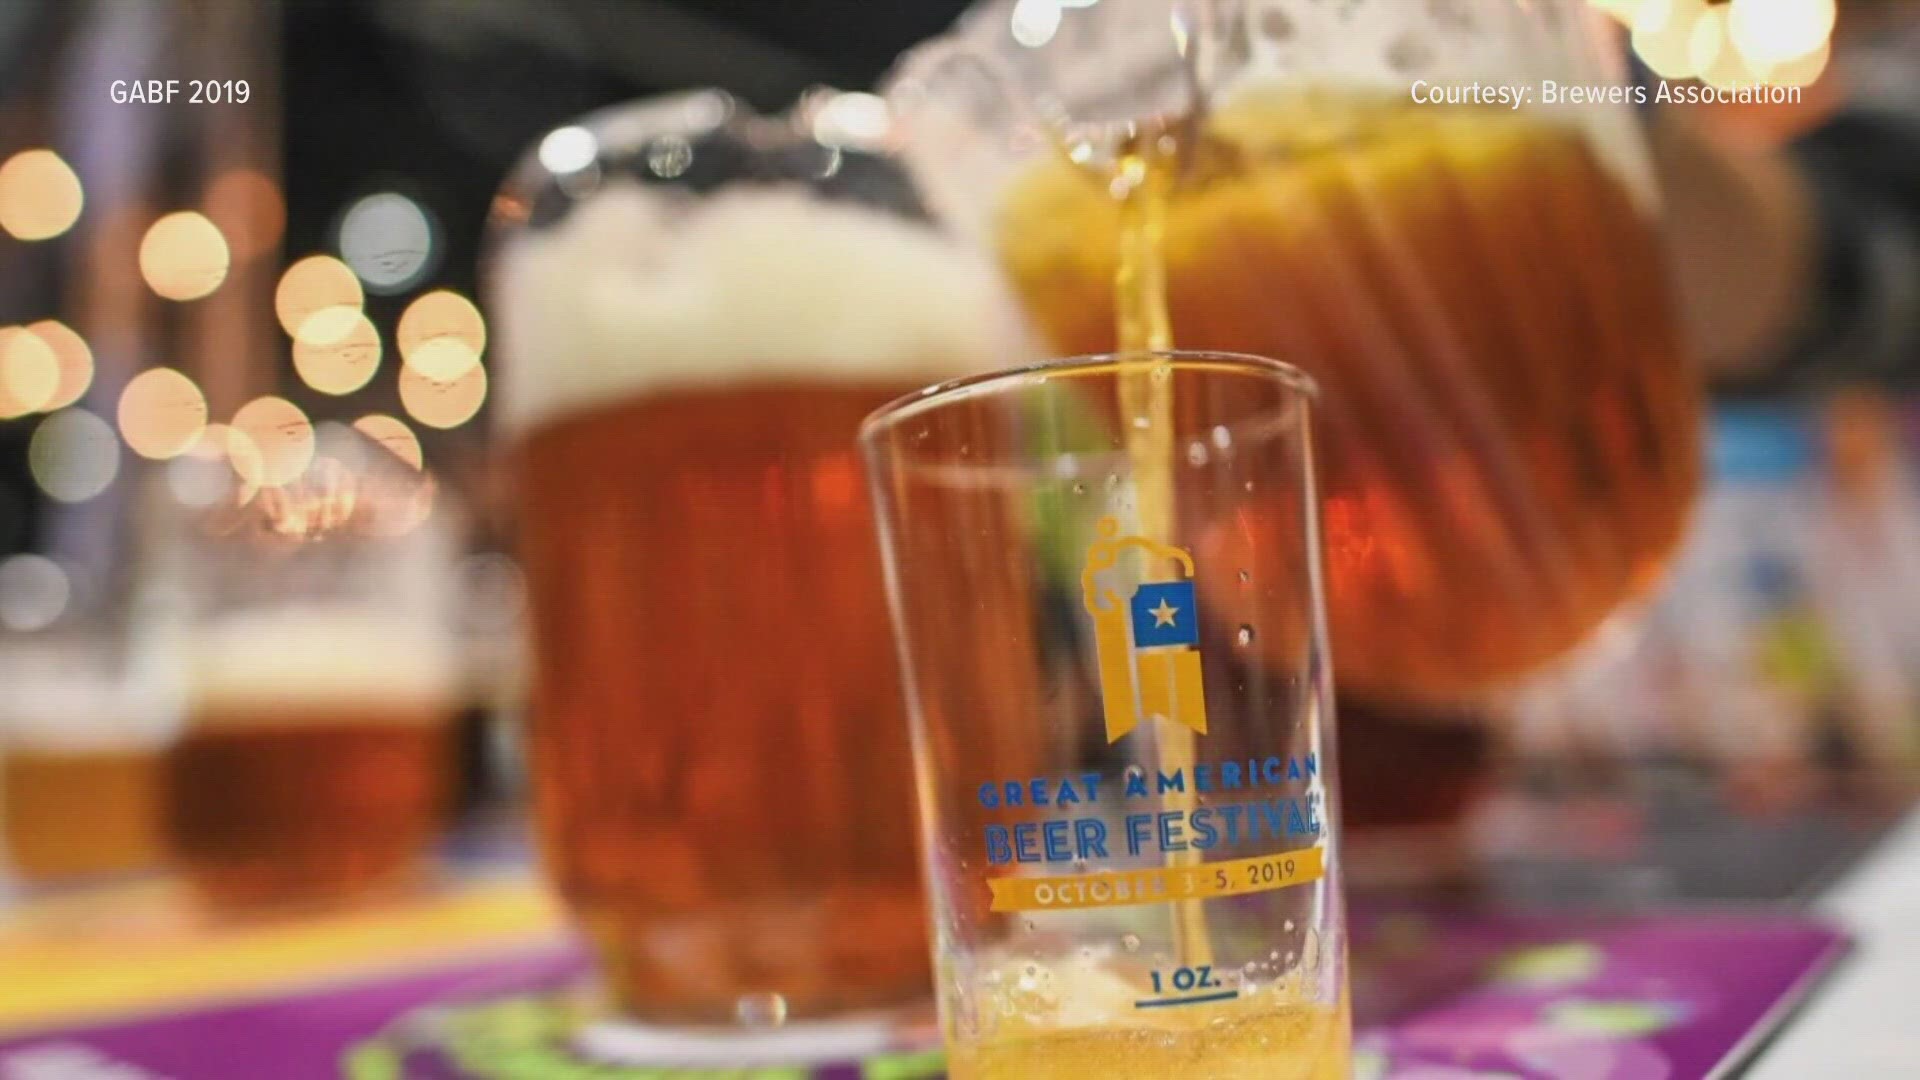 It's the hoppiest weekend of the year as beer lovers travel to the Mile High City for the 41st annual celebration.